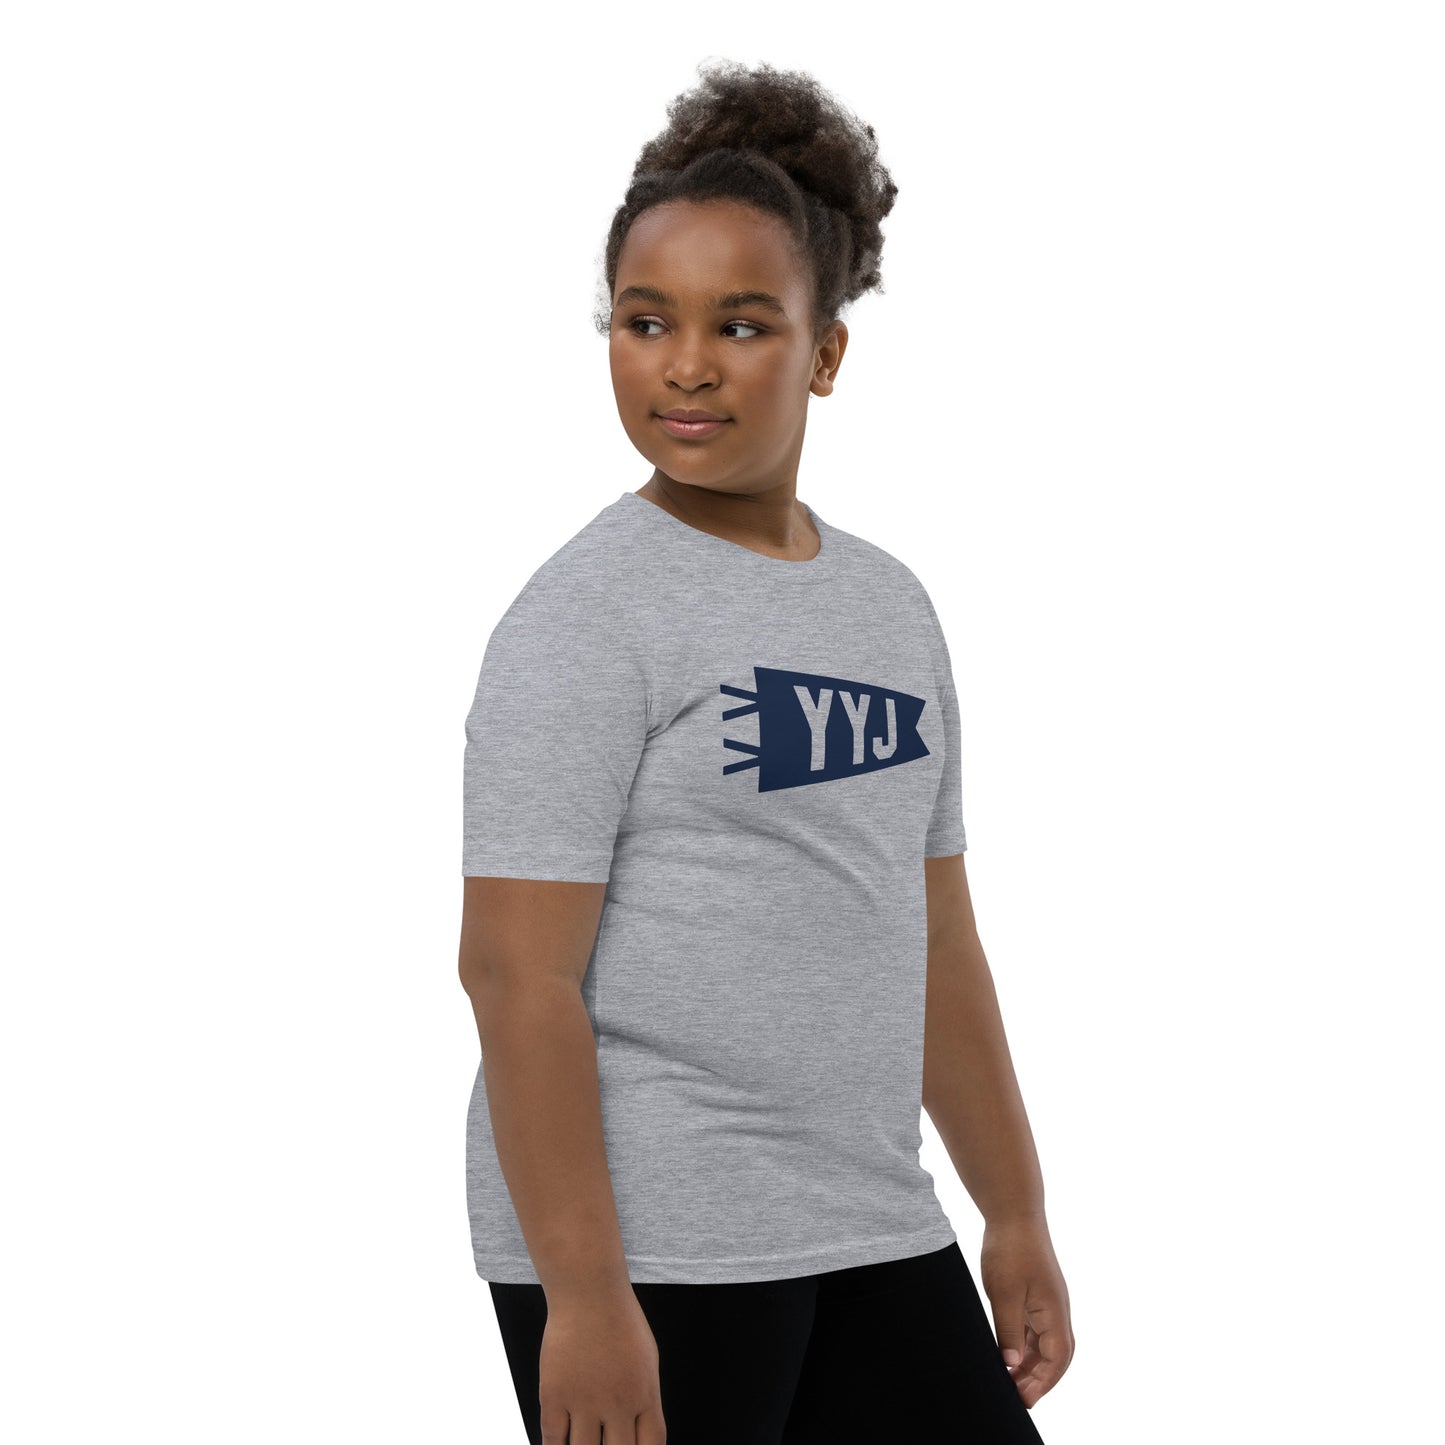 Kid's Airport Code Tee - Navy Blue Graphic • YYJ Victoria • YHM Designs - Image 03